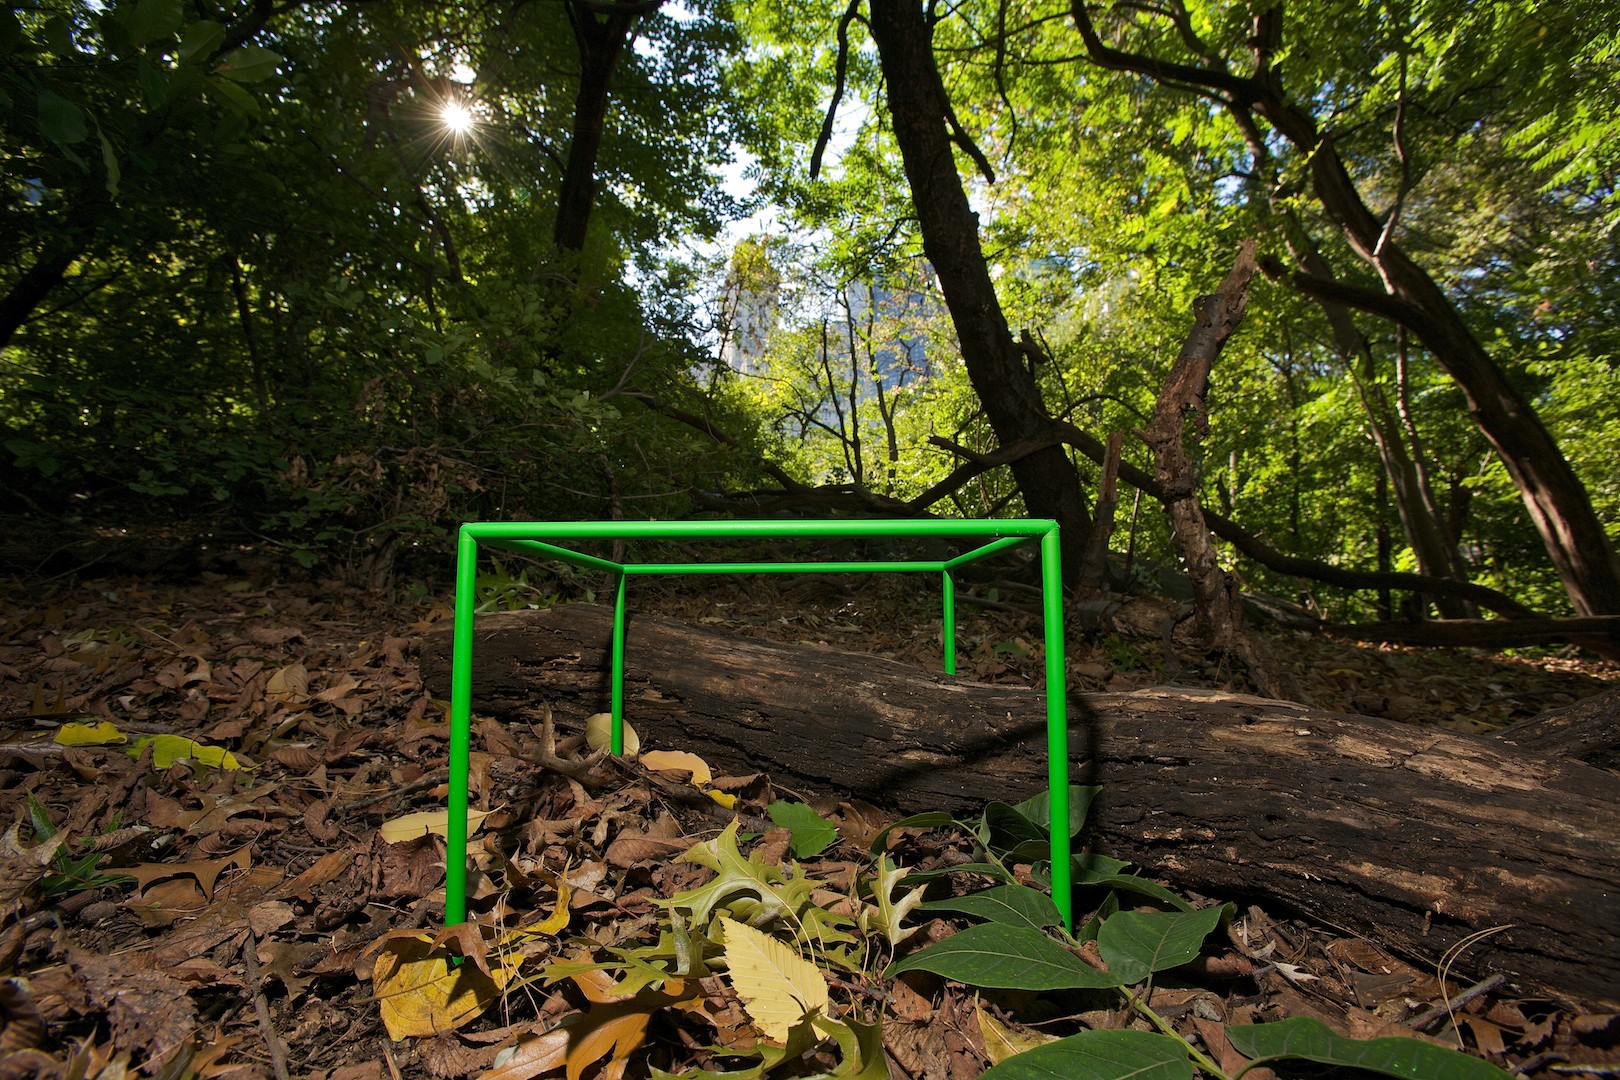 A hallow cube with green edges sits in a wooded park